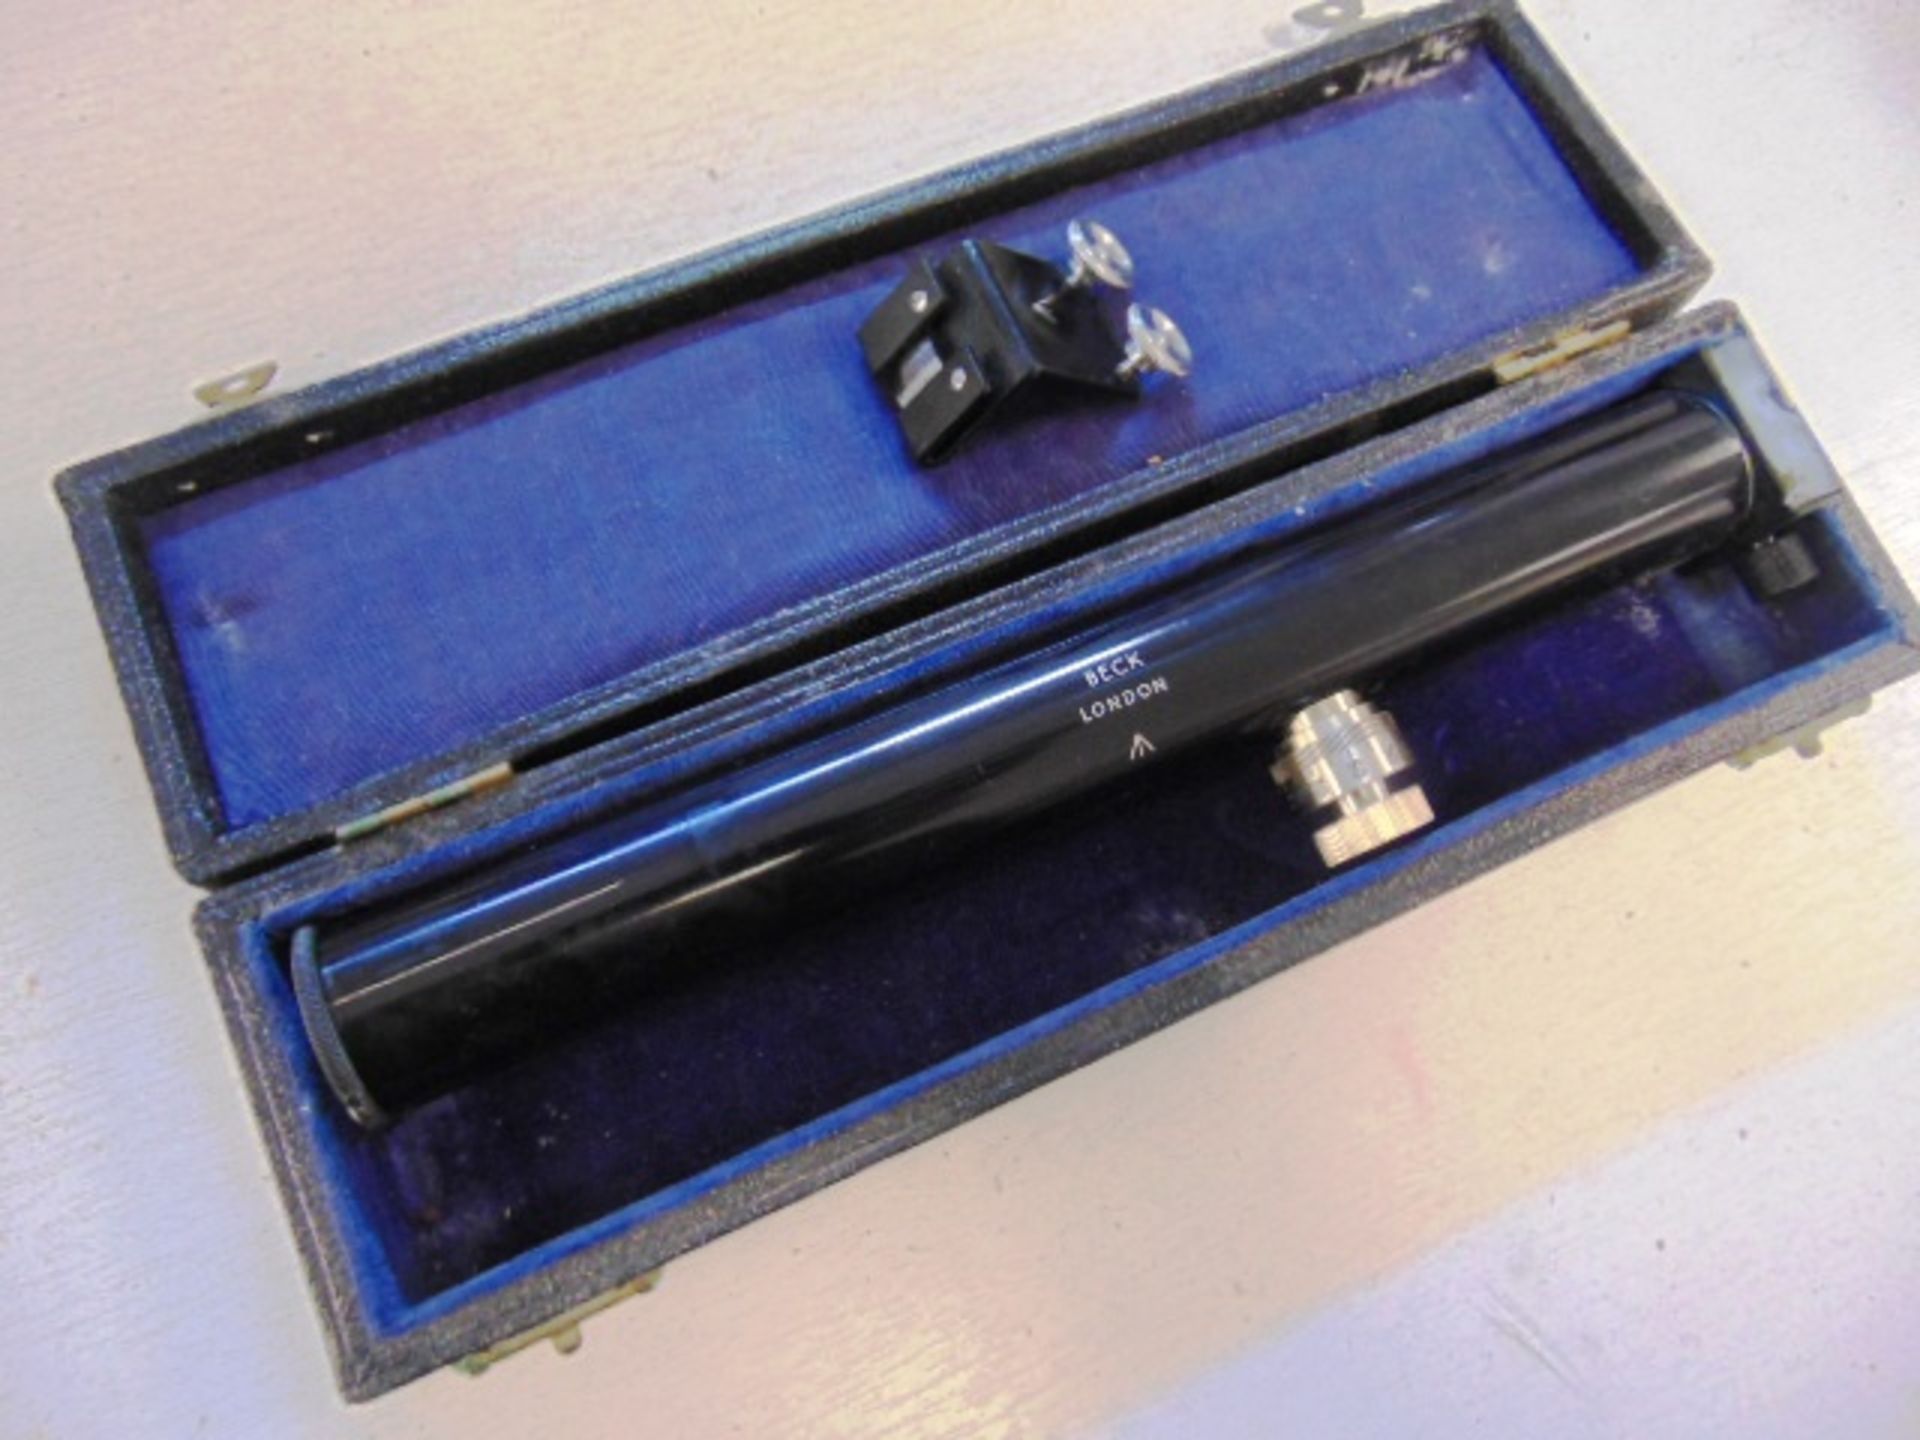 R and J Beck Ltd London Spectrometer with Case